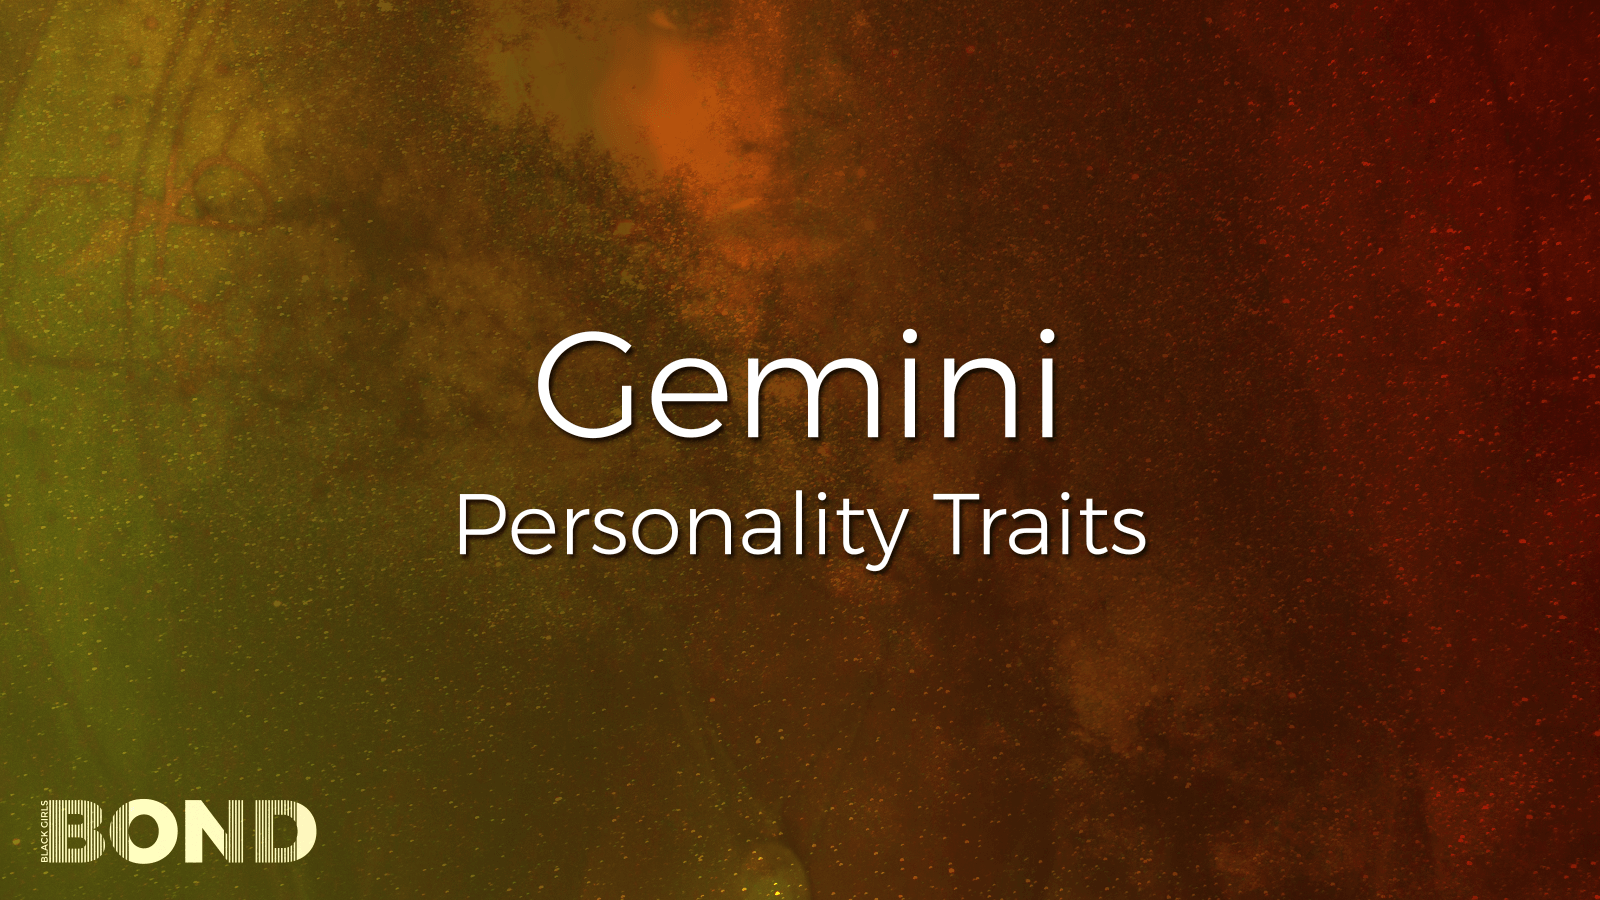 Gemini Zodiac Sign: Personality Traits, Compatibility, Love, Relationships and More